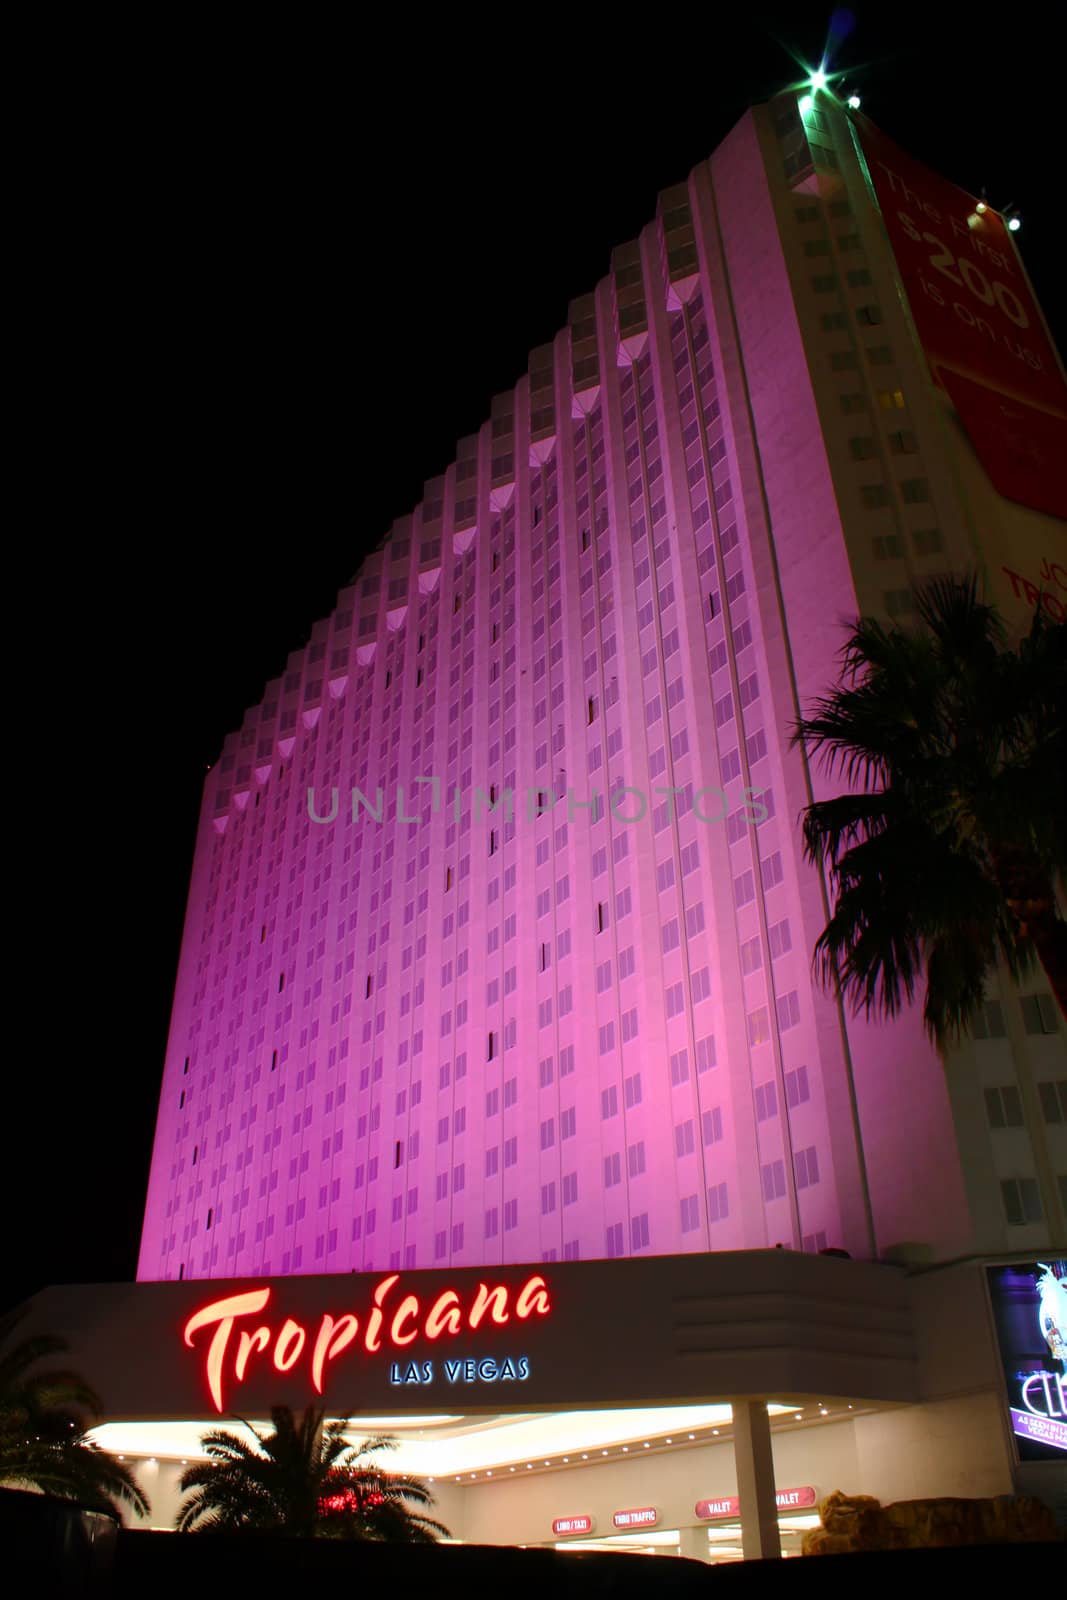 Las Vegas, USA - October 29, 2011: The Tropicana Las Vegas Hotel and Casino is located on the famous Las Vegas Strip in Nevada.  It is one of the oldest hotels on the Strip, being opened in 1957.